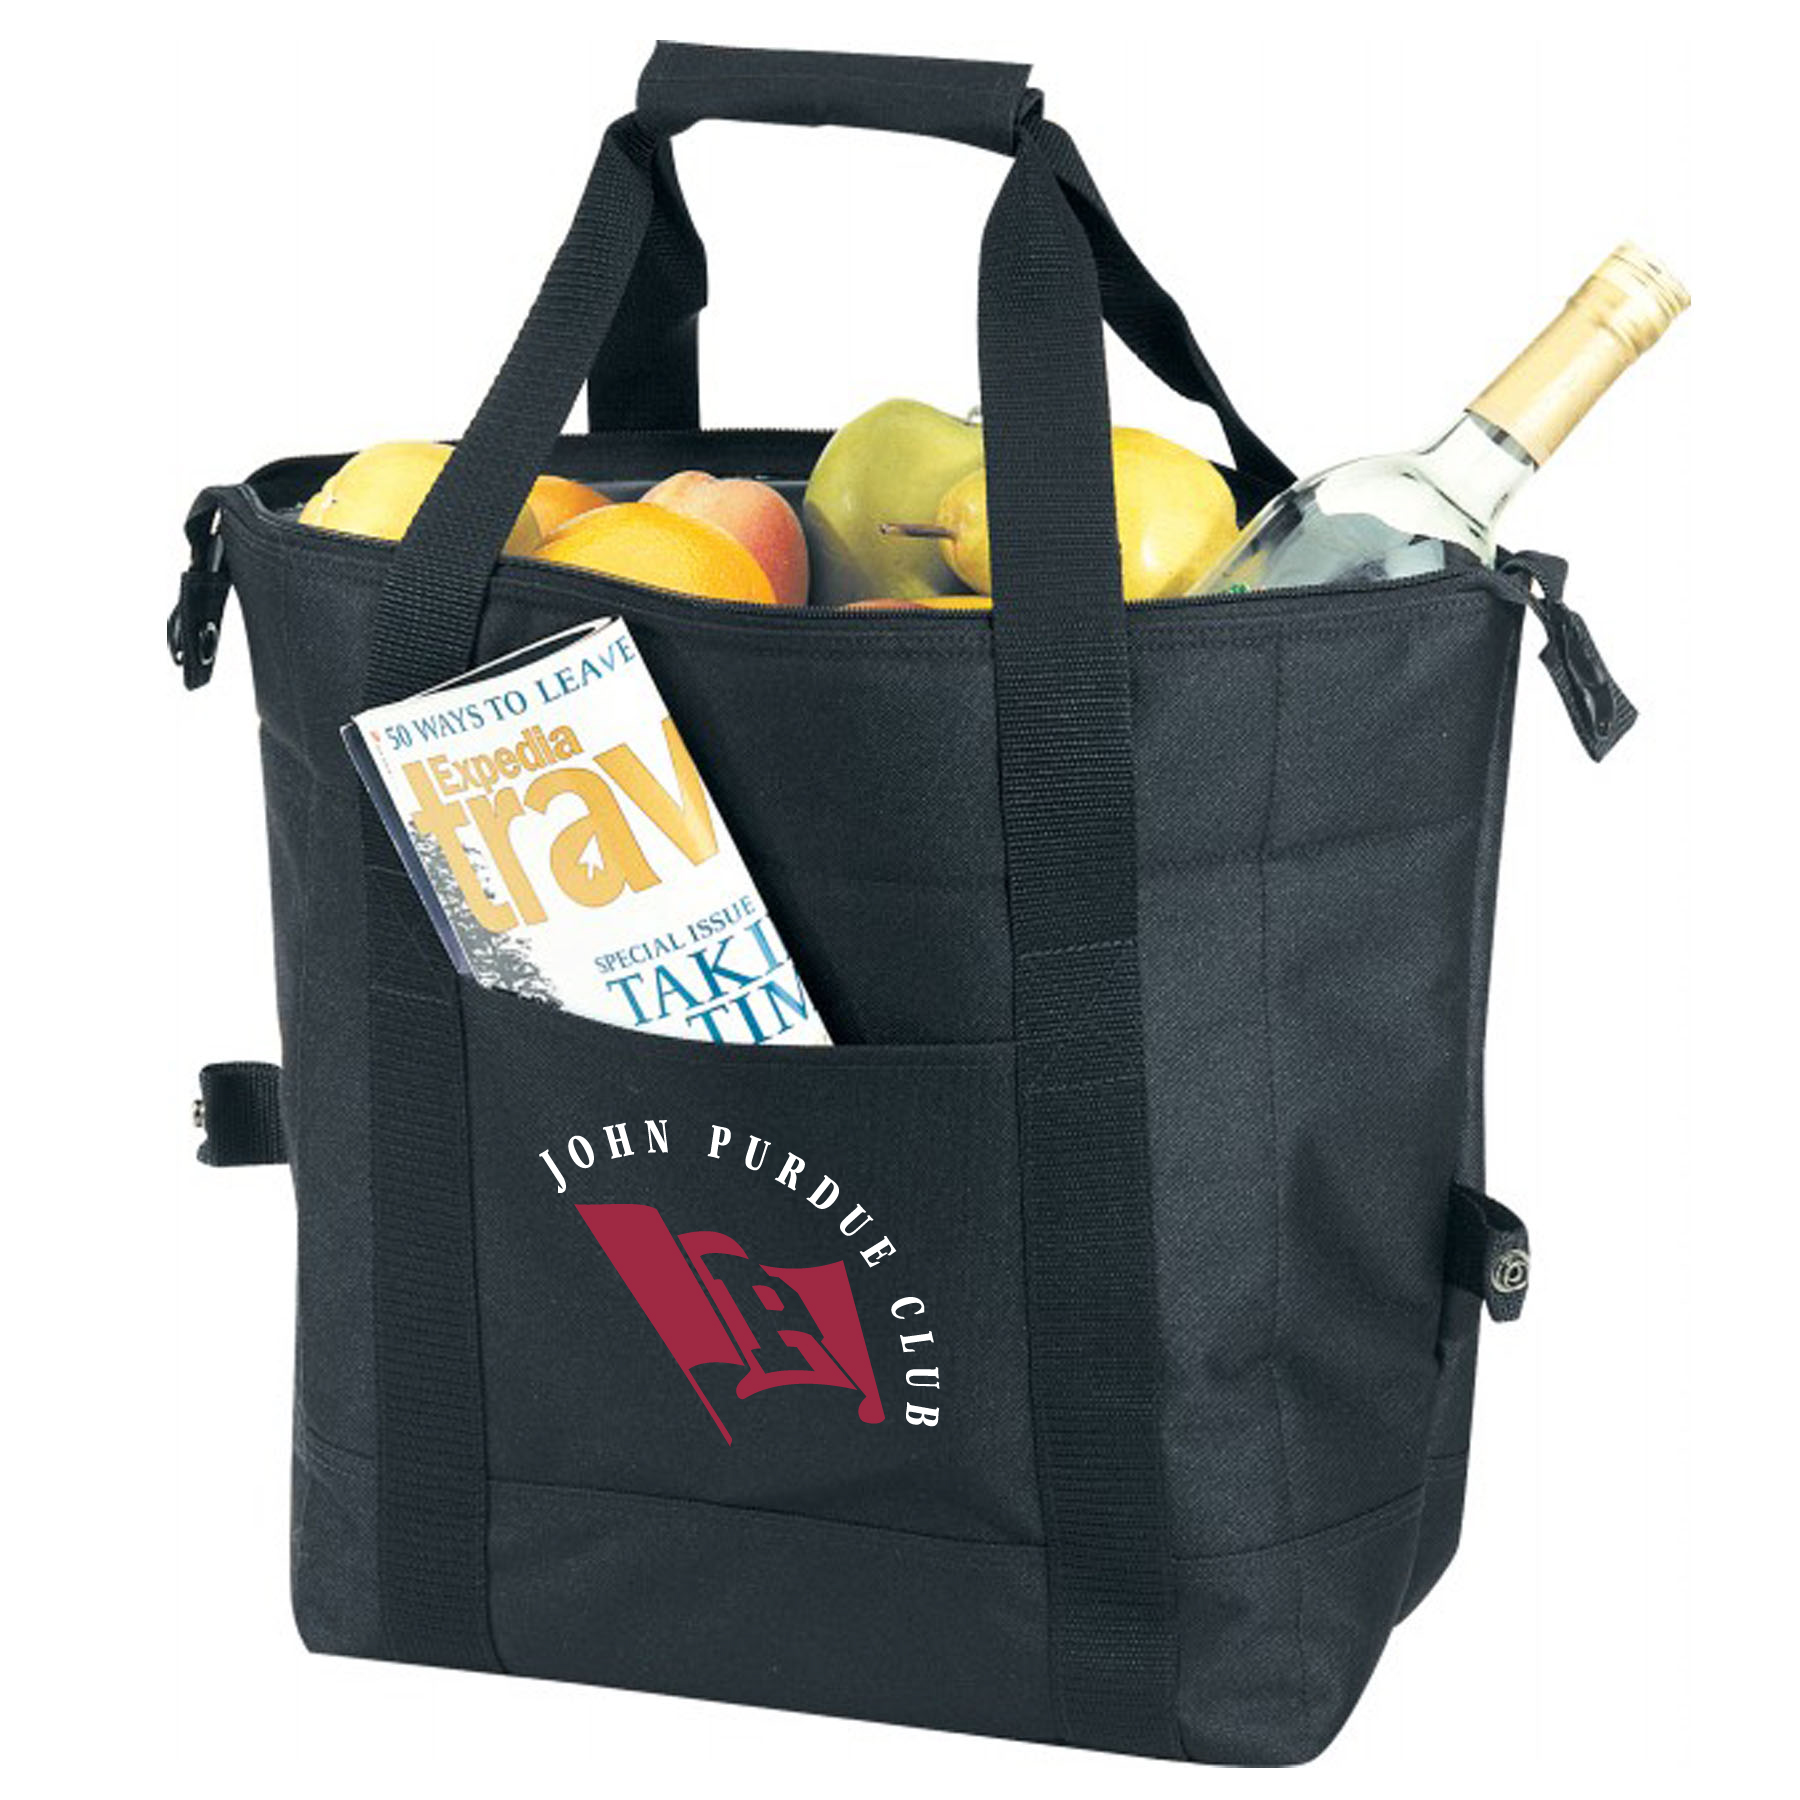 16-Can Cooler Tote